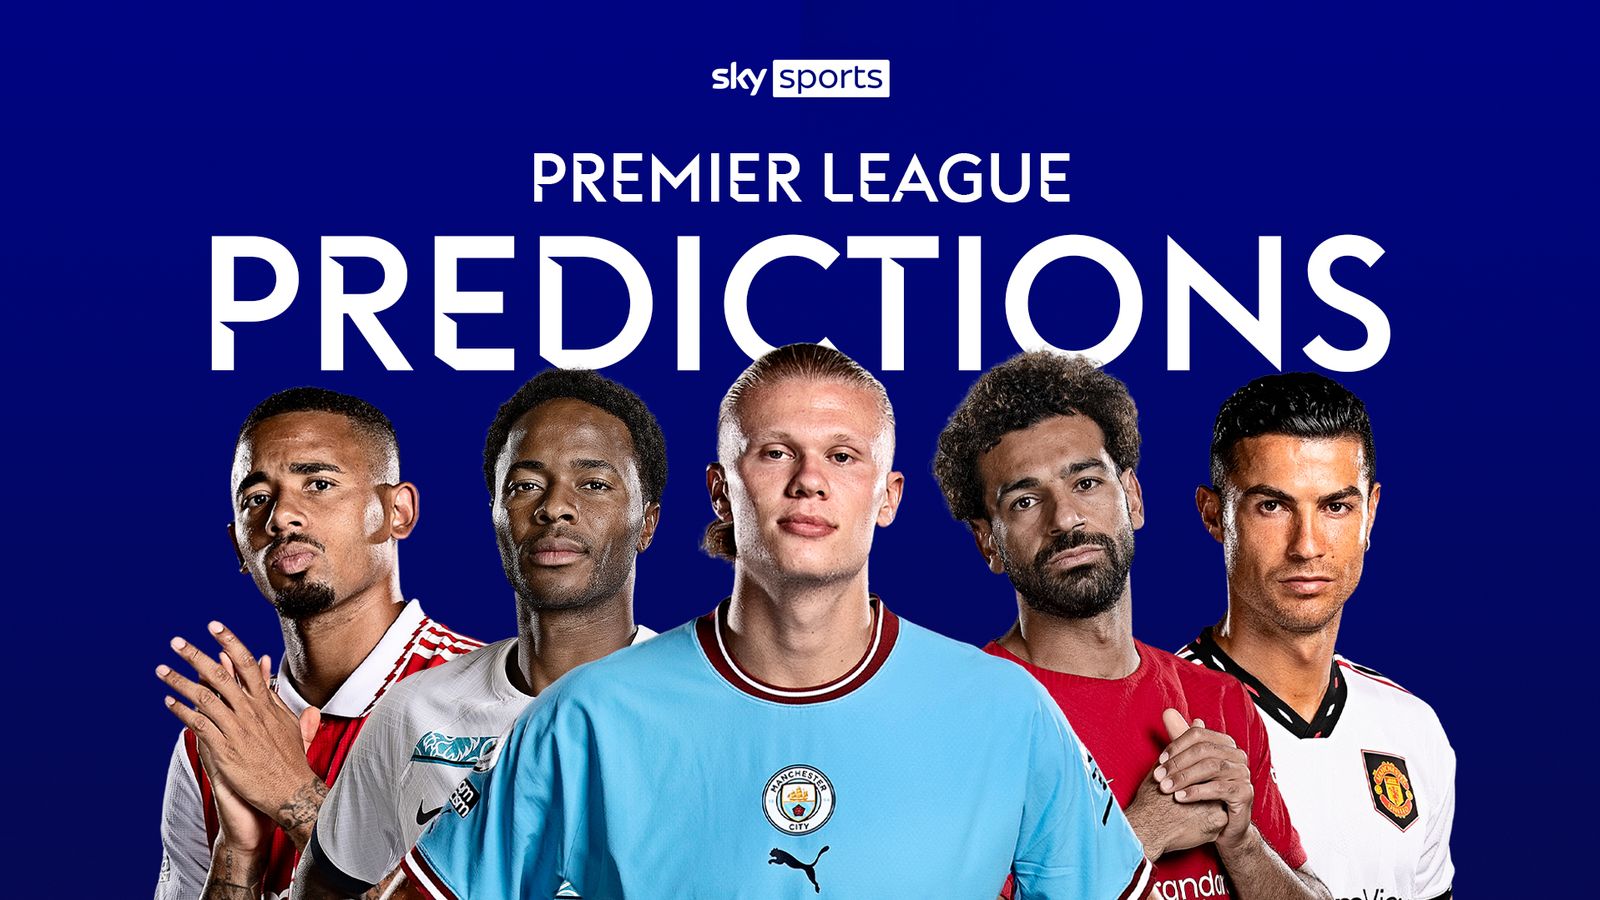 premier-league-predictions-jones-knows-thinks-manchester-united-will-fall-to-seventh-straight-away-league-defeat-at-brentford